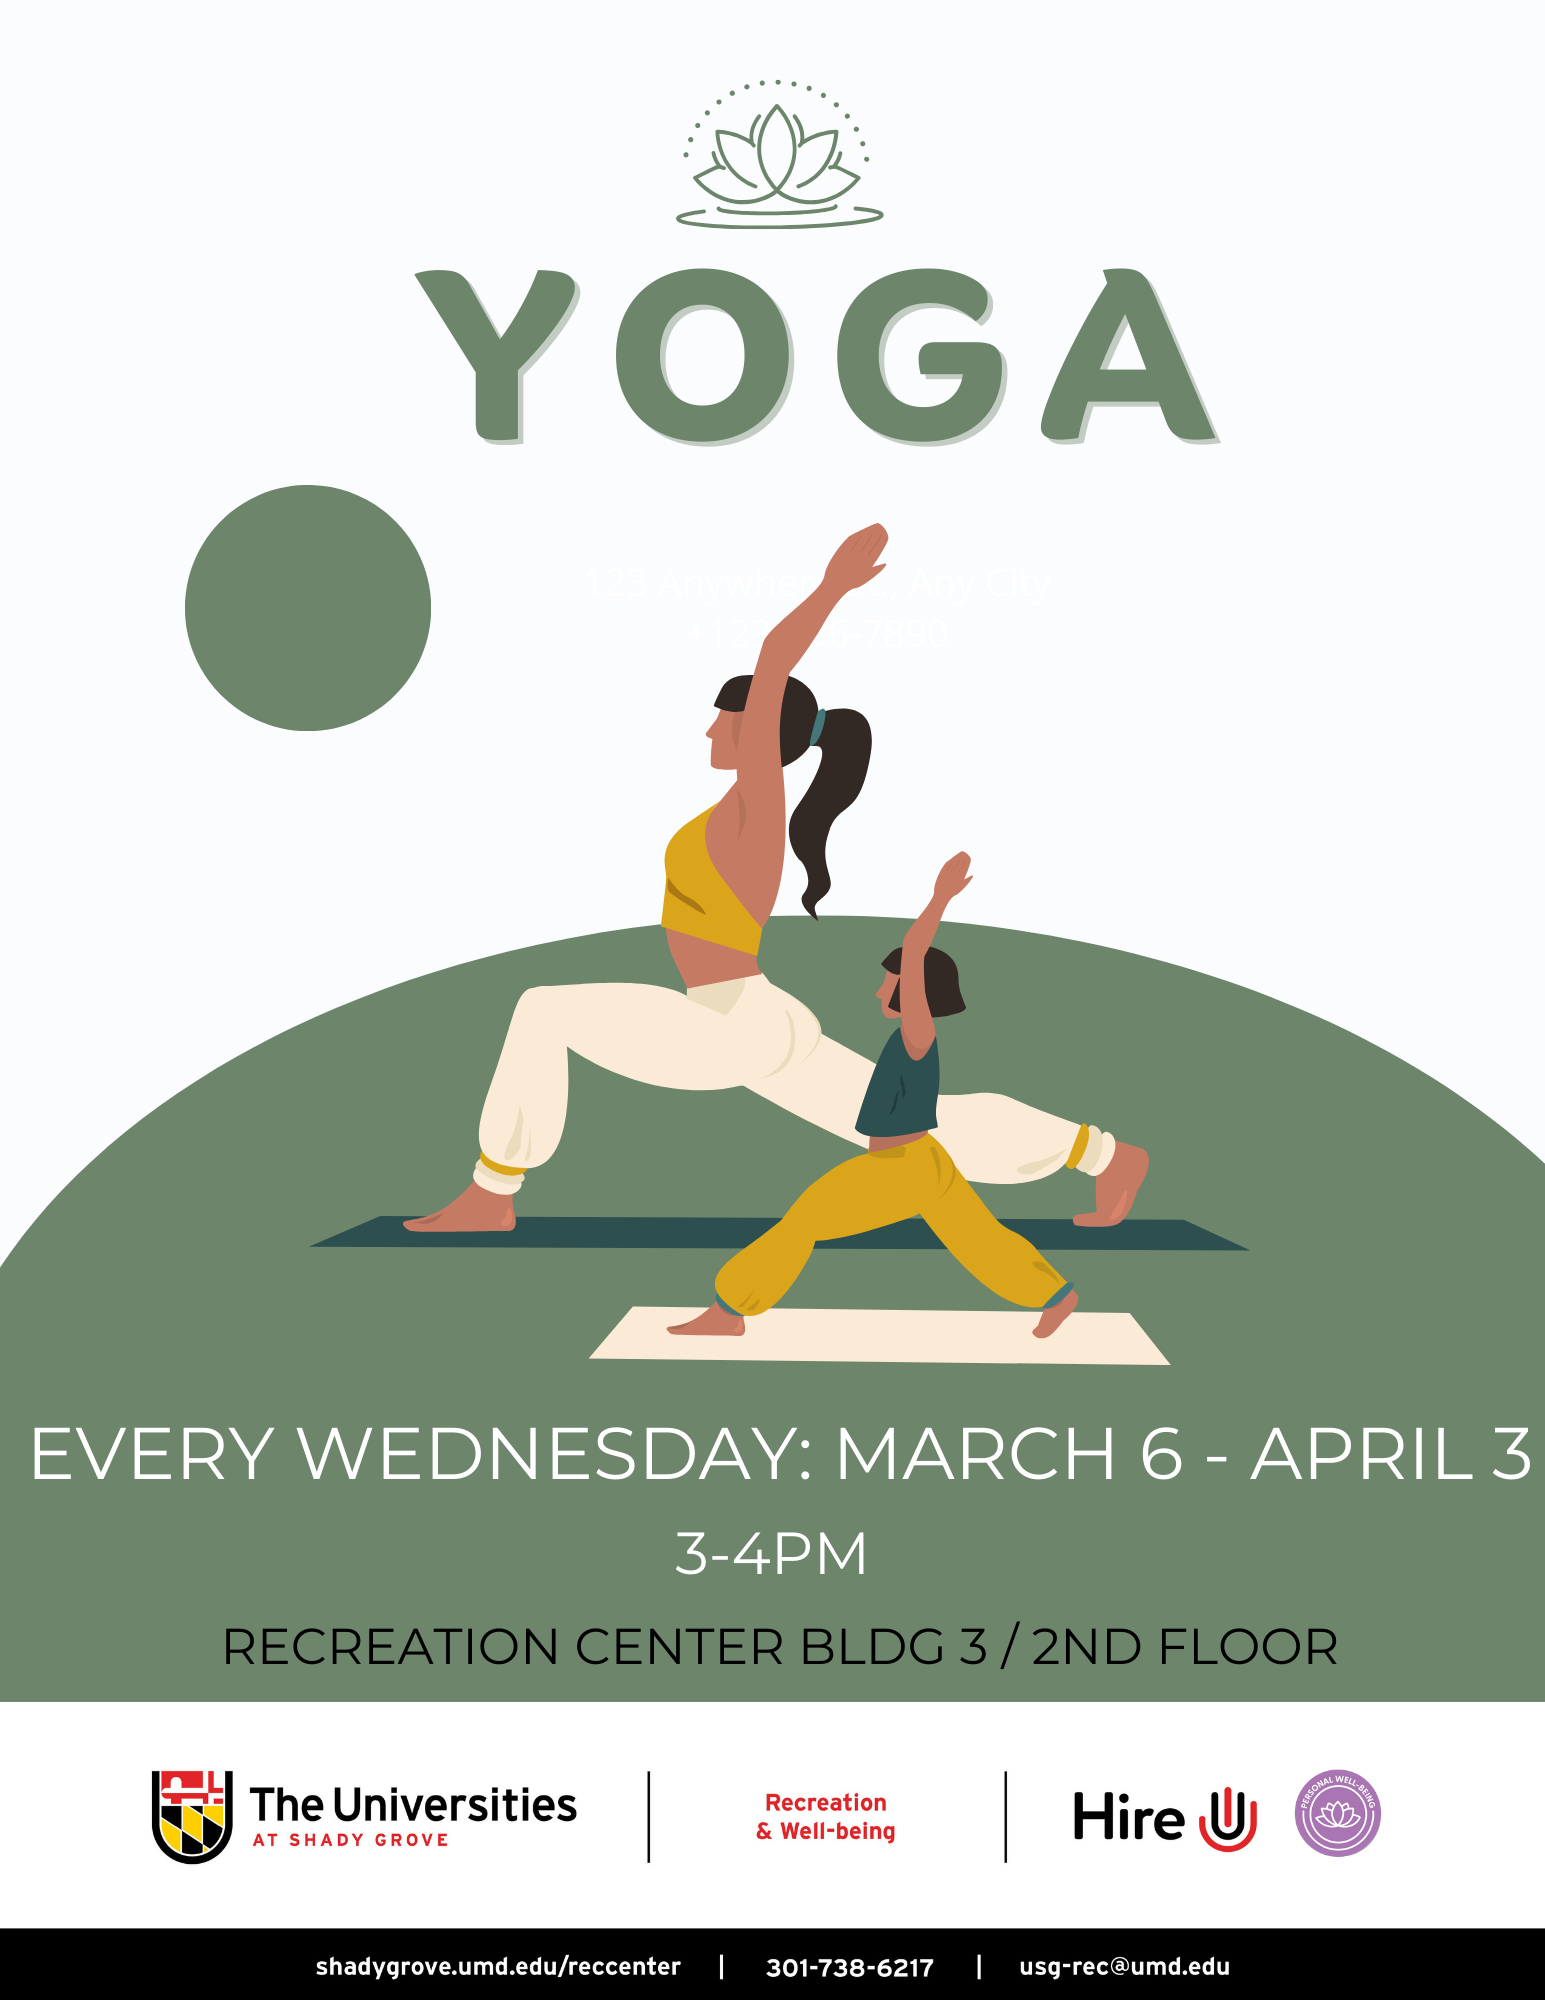 Yoga Class:  Every Wednesday: 3/6 - 4/3, from 3-4PM. Join USG’s Recreation and Well-being with a student instructor-led Yoga class! Connect your body, breath, and mind with posture, breathing exercises, and meditation to improve your health! Location: Campus Rec Center BLDG III, 2nd Floor